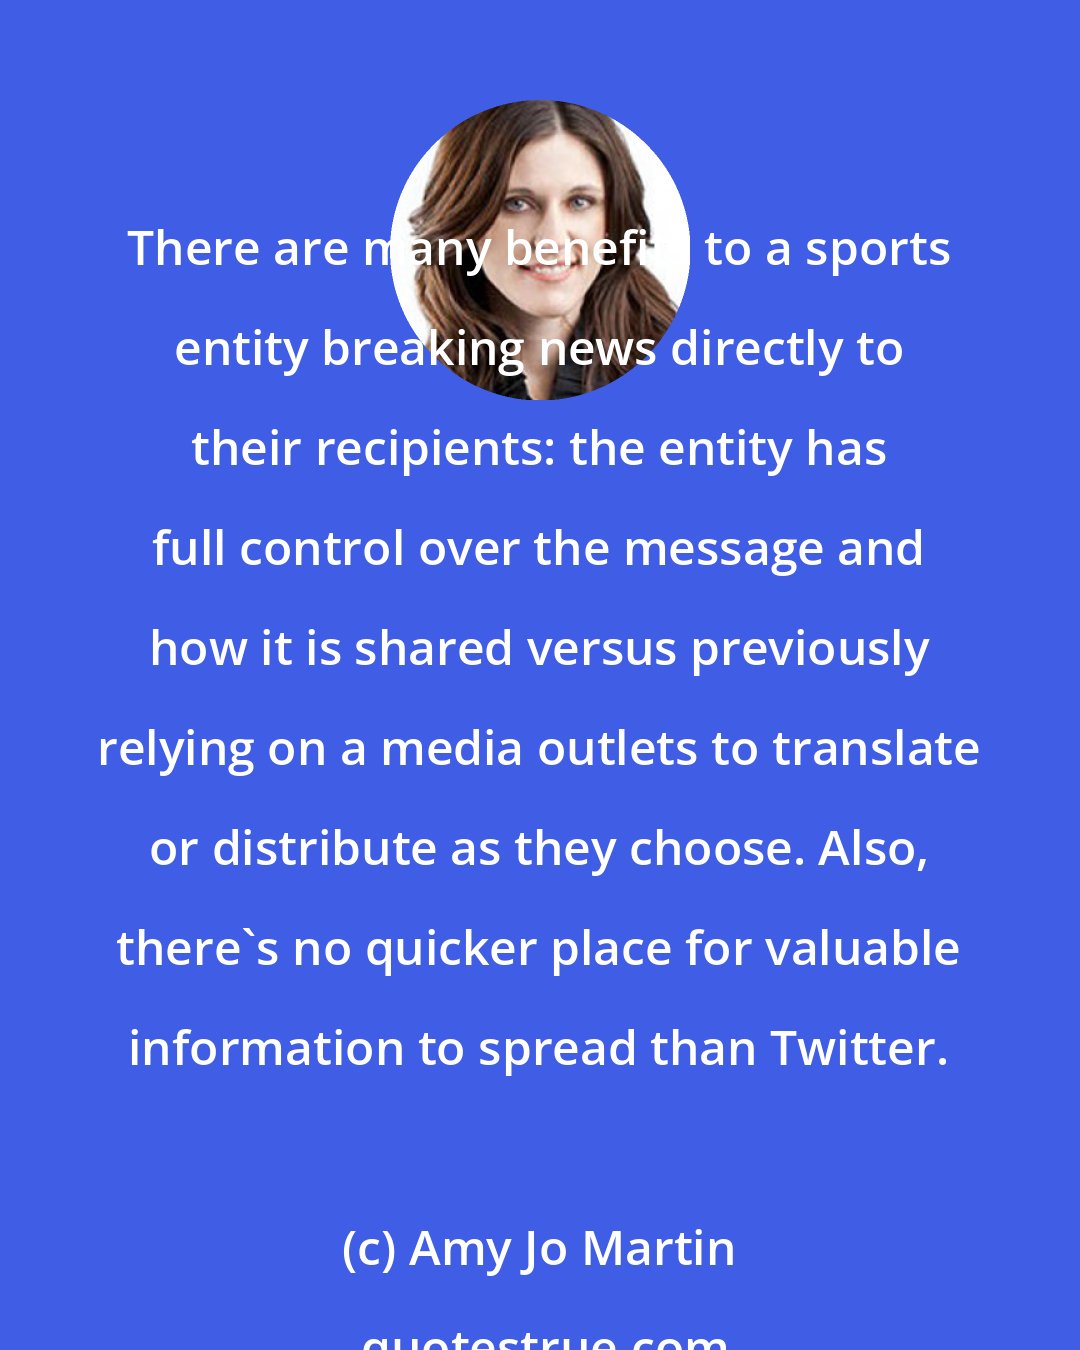 Amy Jo Martin: There are many benefits to a sports entity breaking news directly to their recipients: the entity has full control over the message and how it is shared versus previously relying on a media outlets to translate or distribute as they choose. Also, there's no quicker place for valuable information to spread than Twitter.